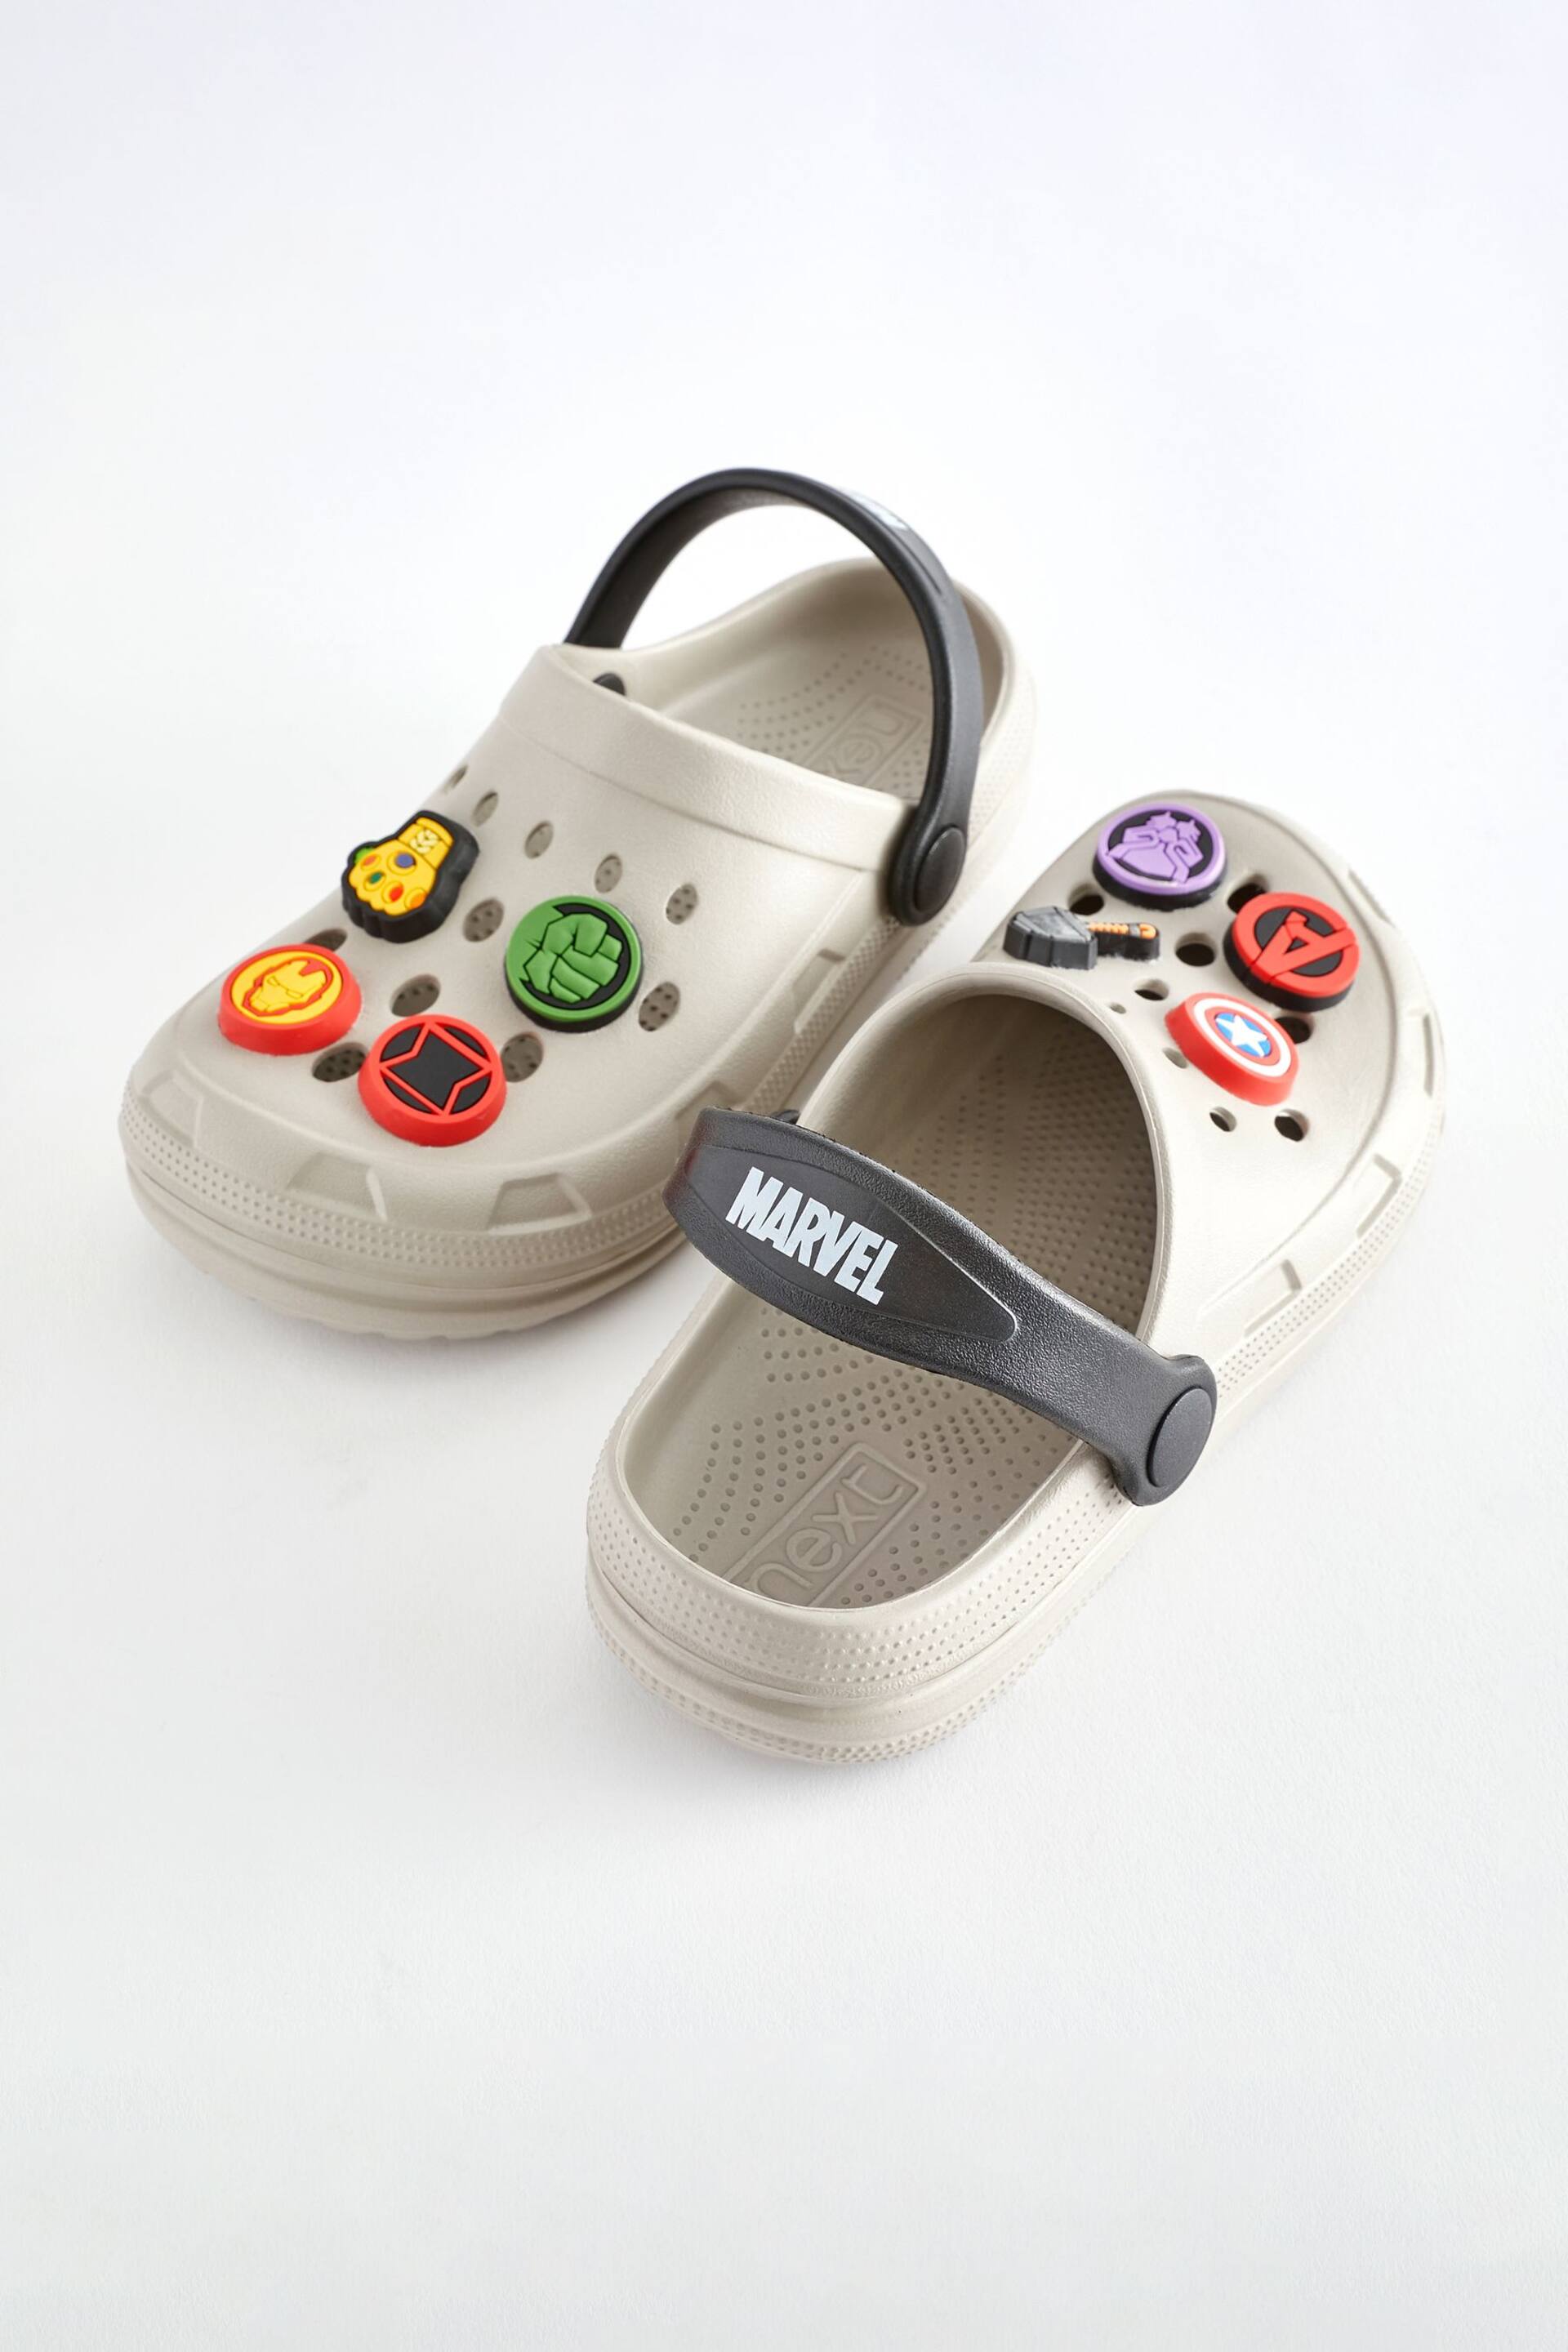 Neutral Marvel Clogs - Image 5 of 5